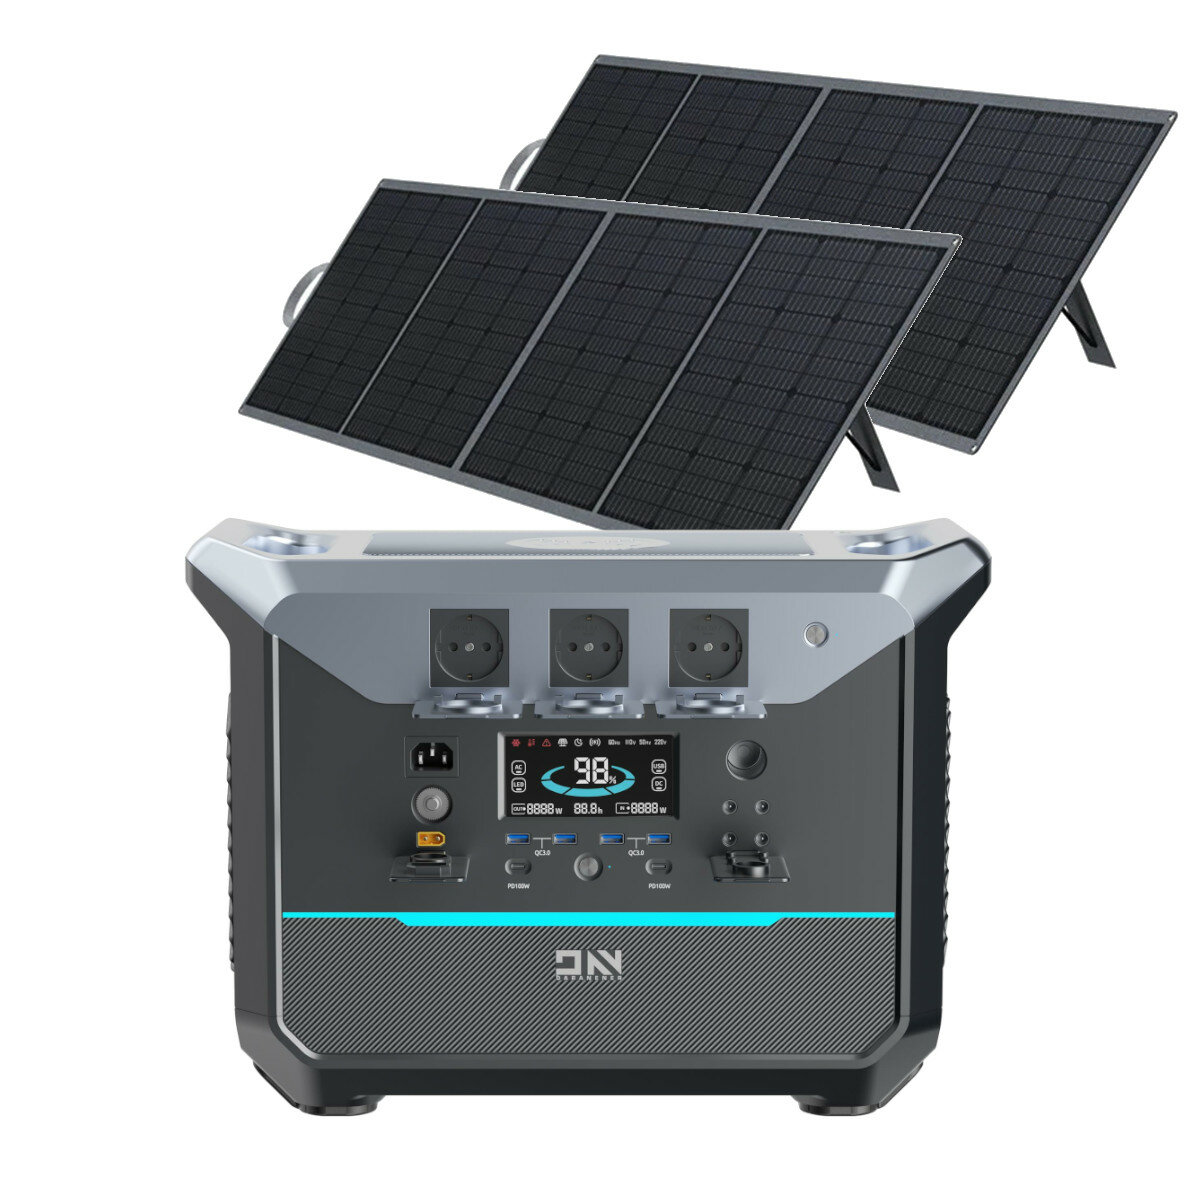 [EU Direct] DaranEner NEO2000 2000W 2073.6Wh LiFePO4 Battery Portable Kraftstasjon with 2Pc SP200 200W ETFE Solcellepanel, UPS Power Supply AC Sockets with 1.8 Hours Fast Charging Solar Powered Generator for Home Outdoors Camping Travel RV